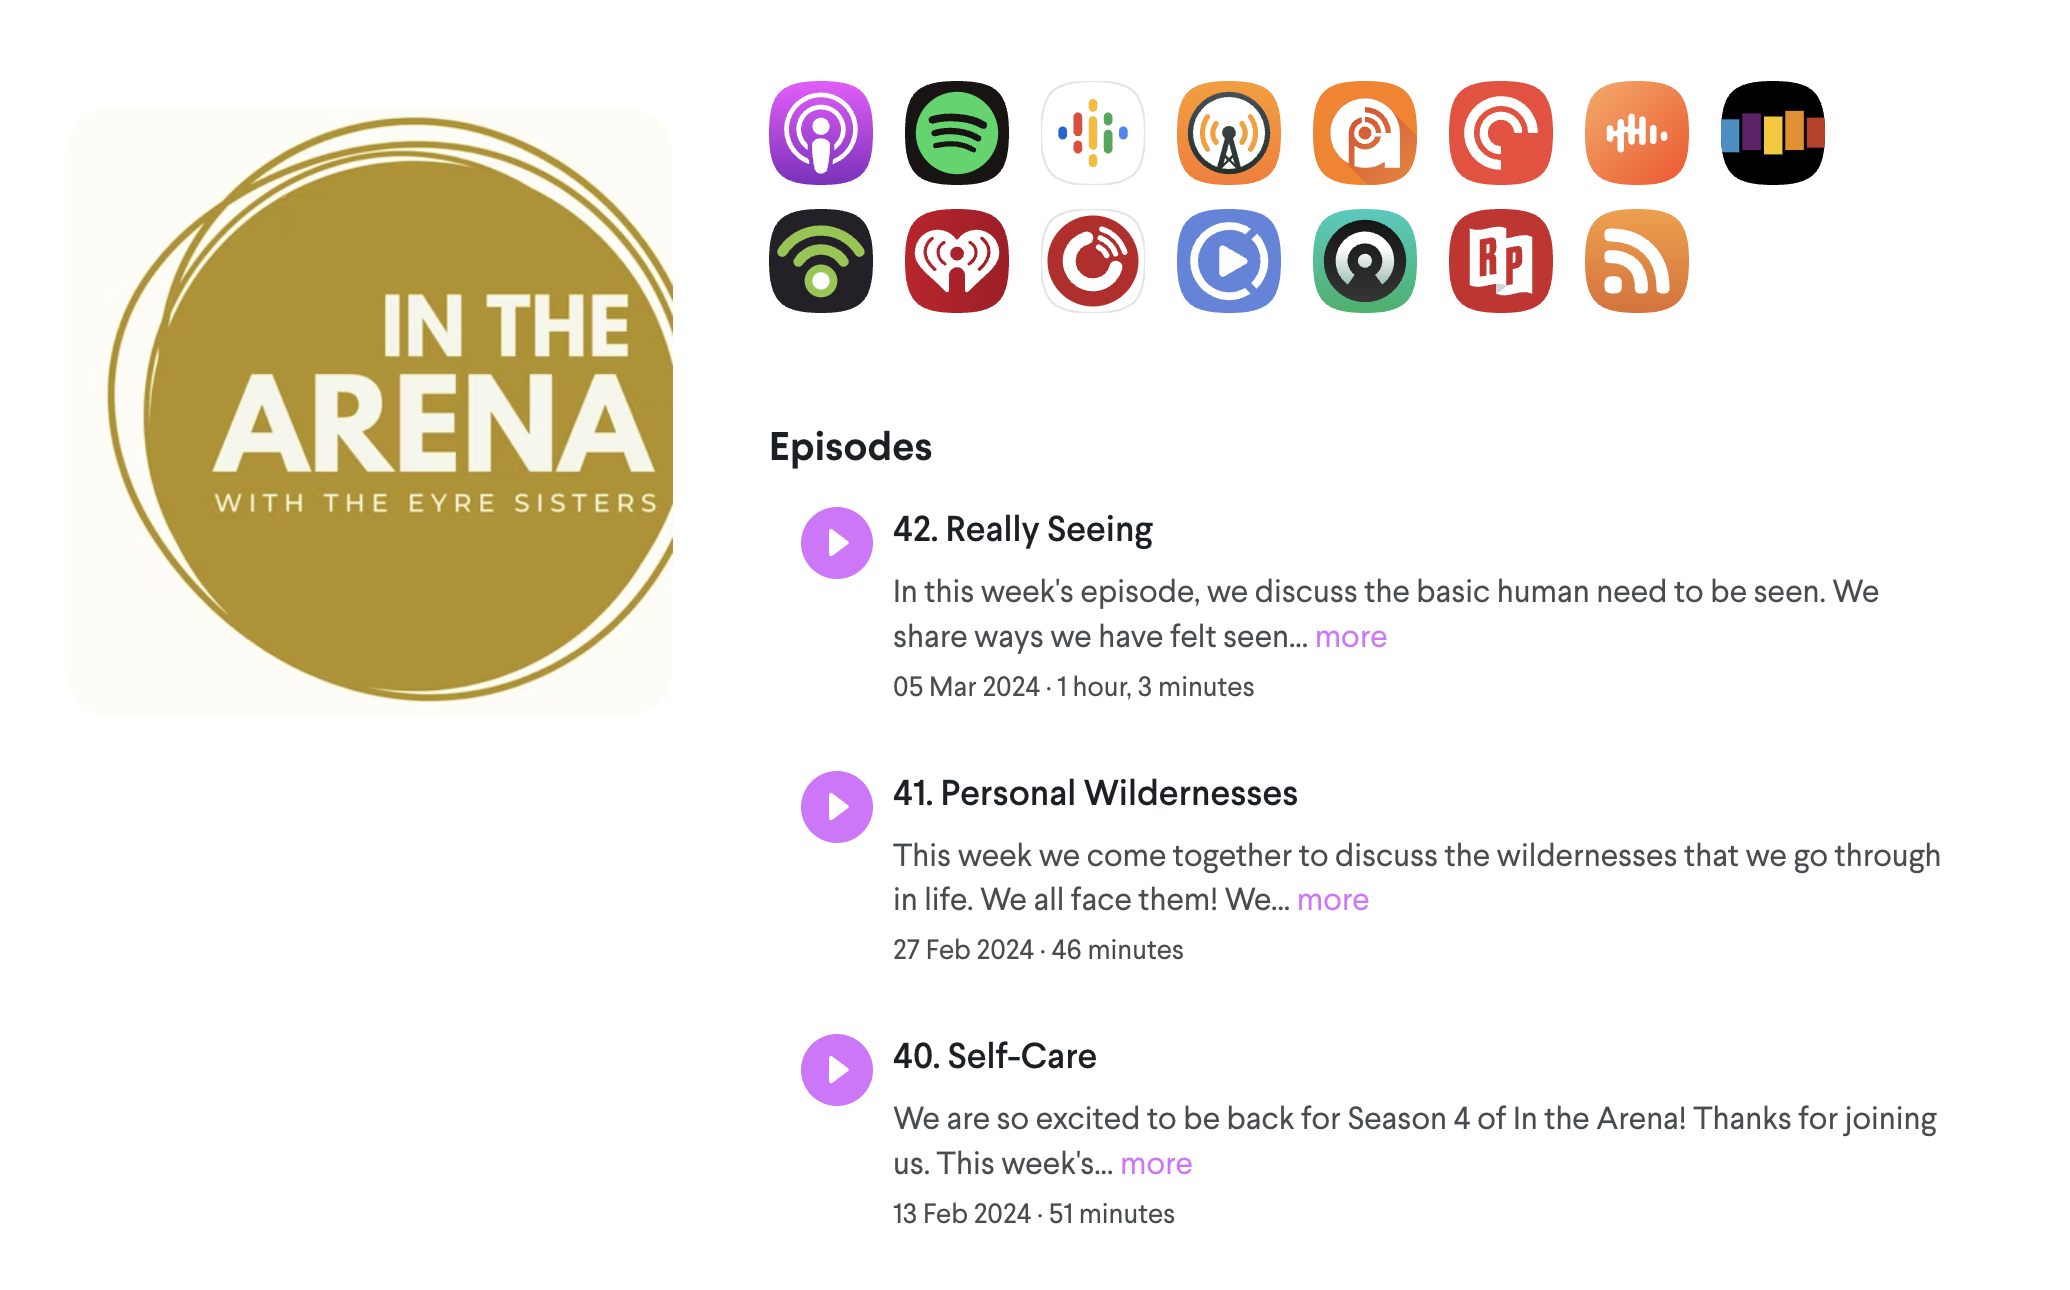 A New Season of our “In the Arena” Podcast!